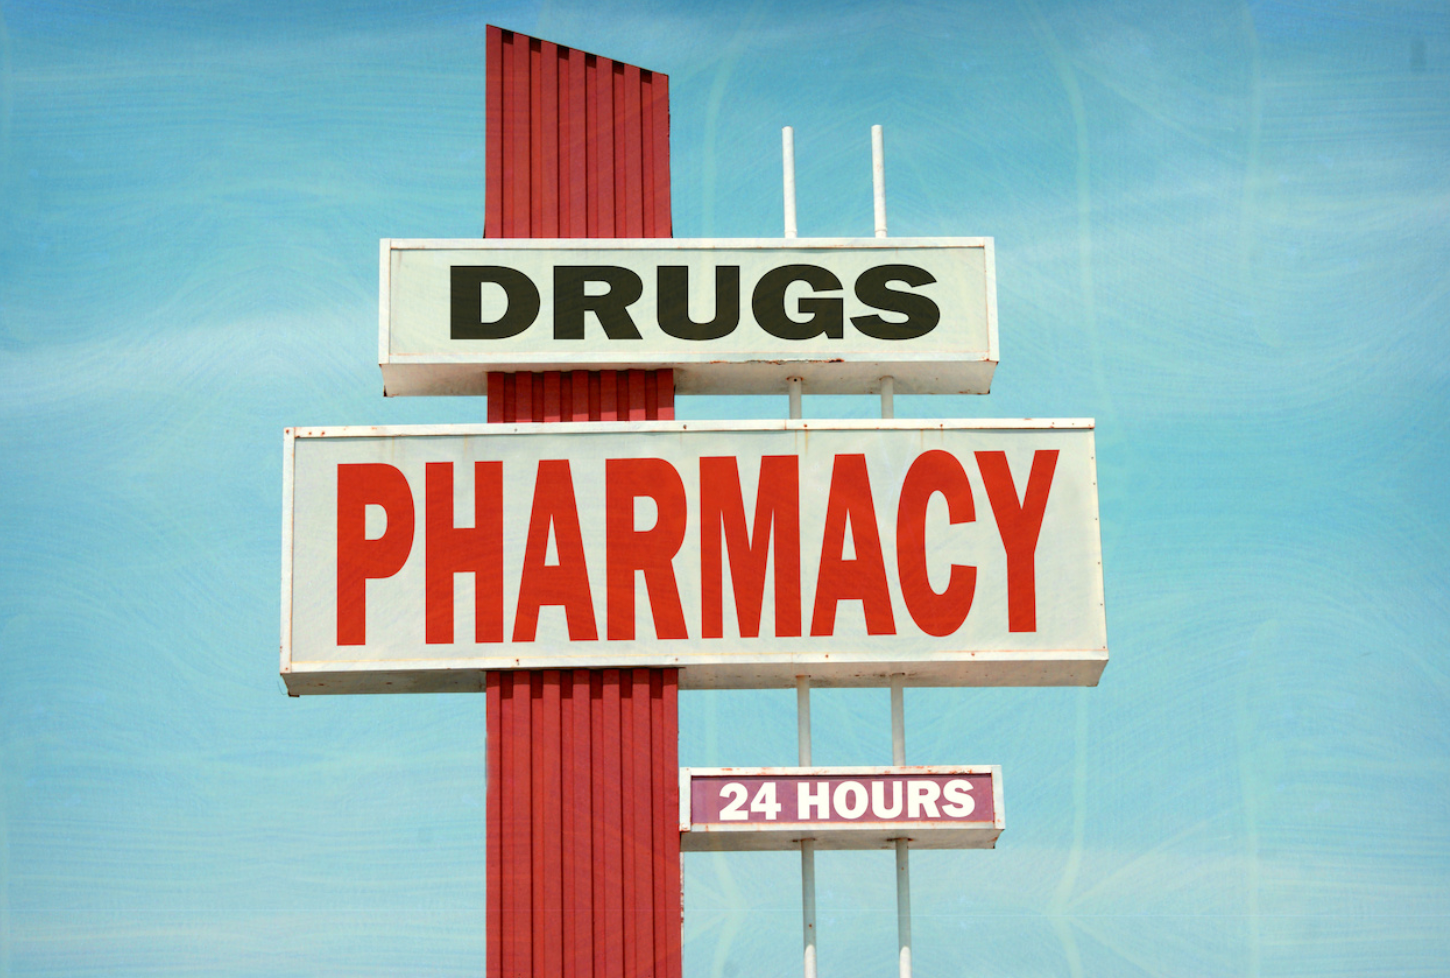 Commonly Overlooked Adverse Effects in the Community, Clinical Pharmacy Settings